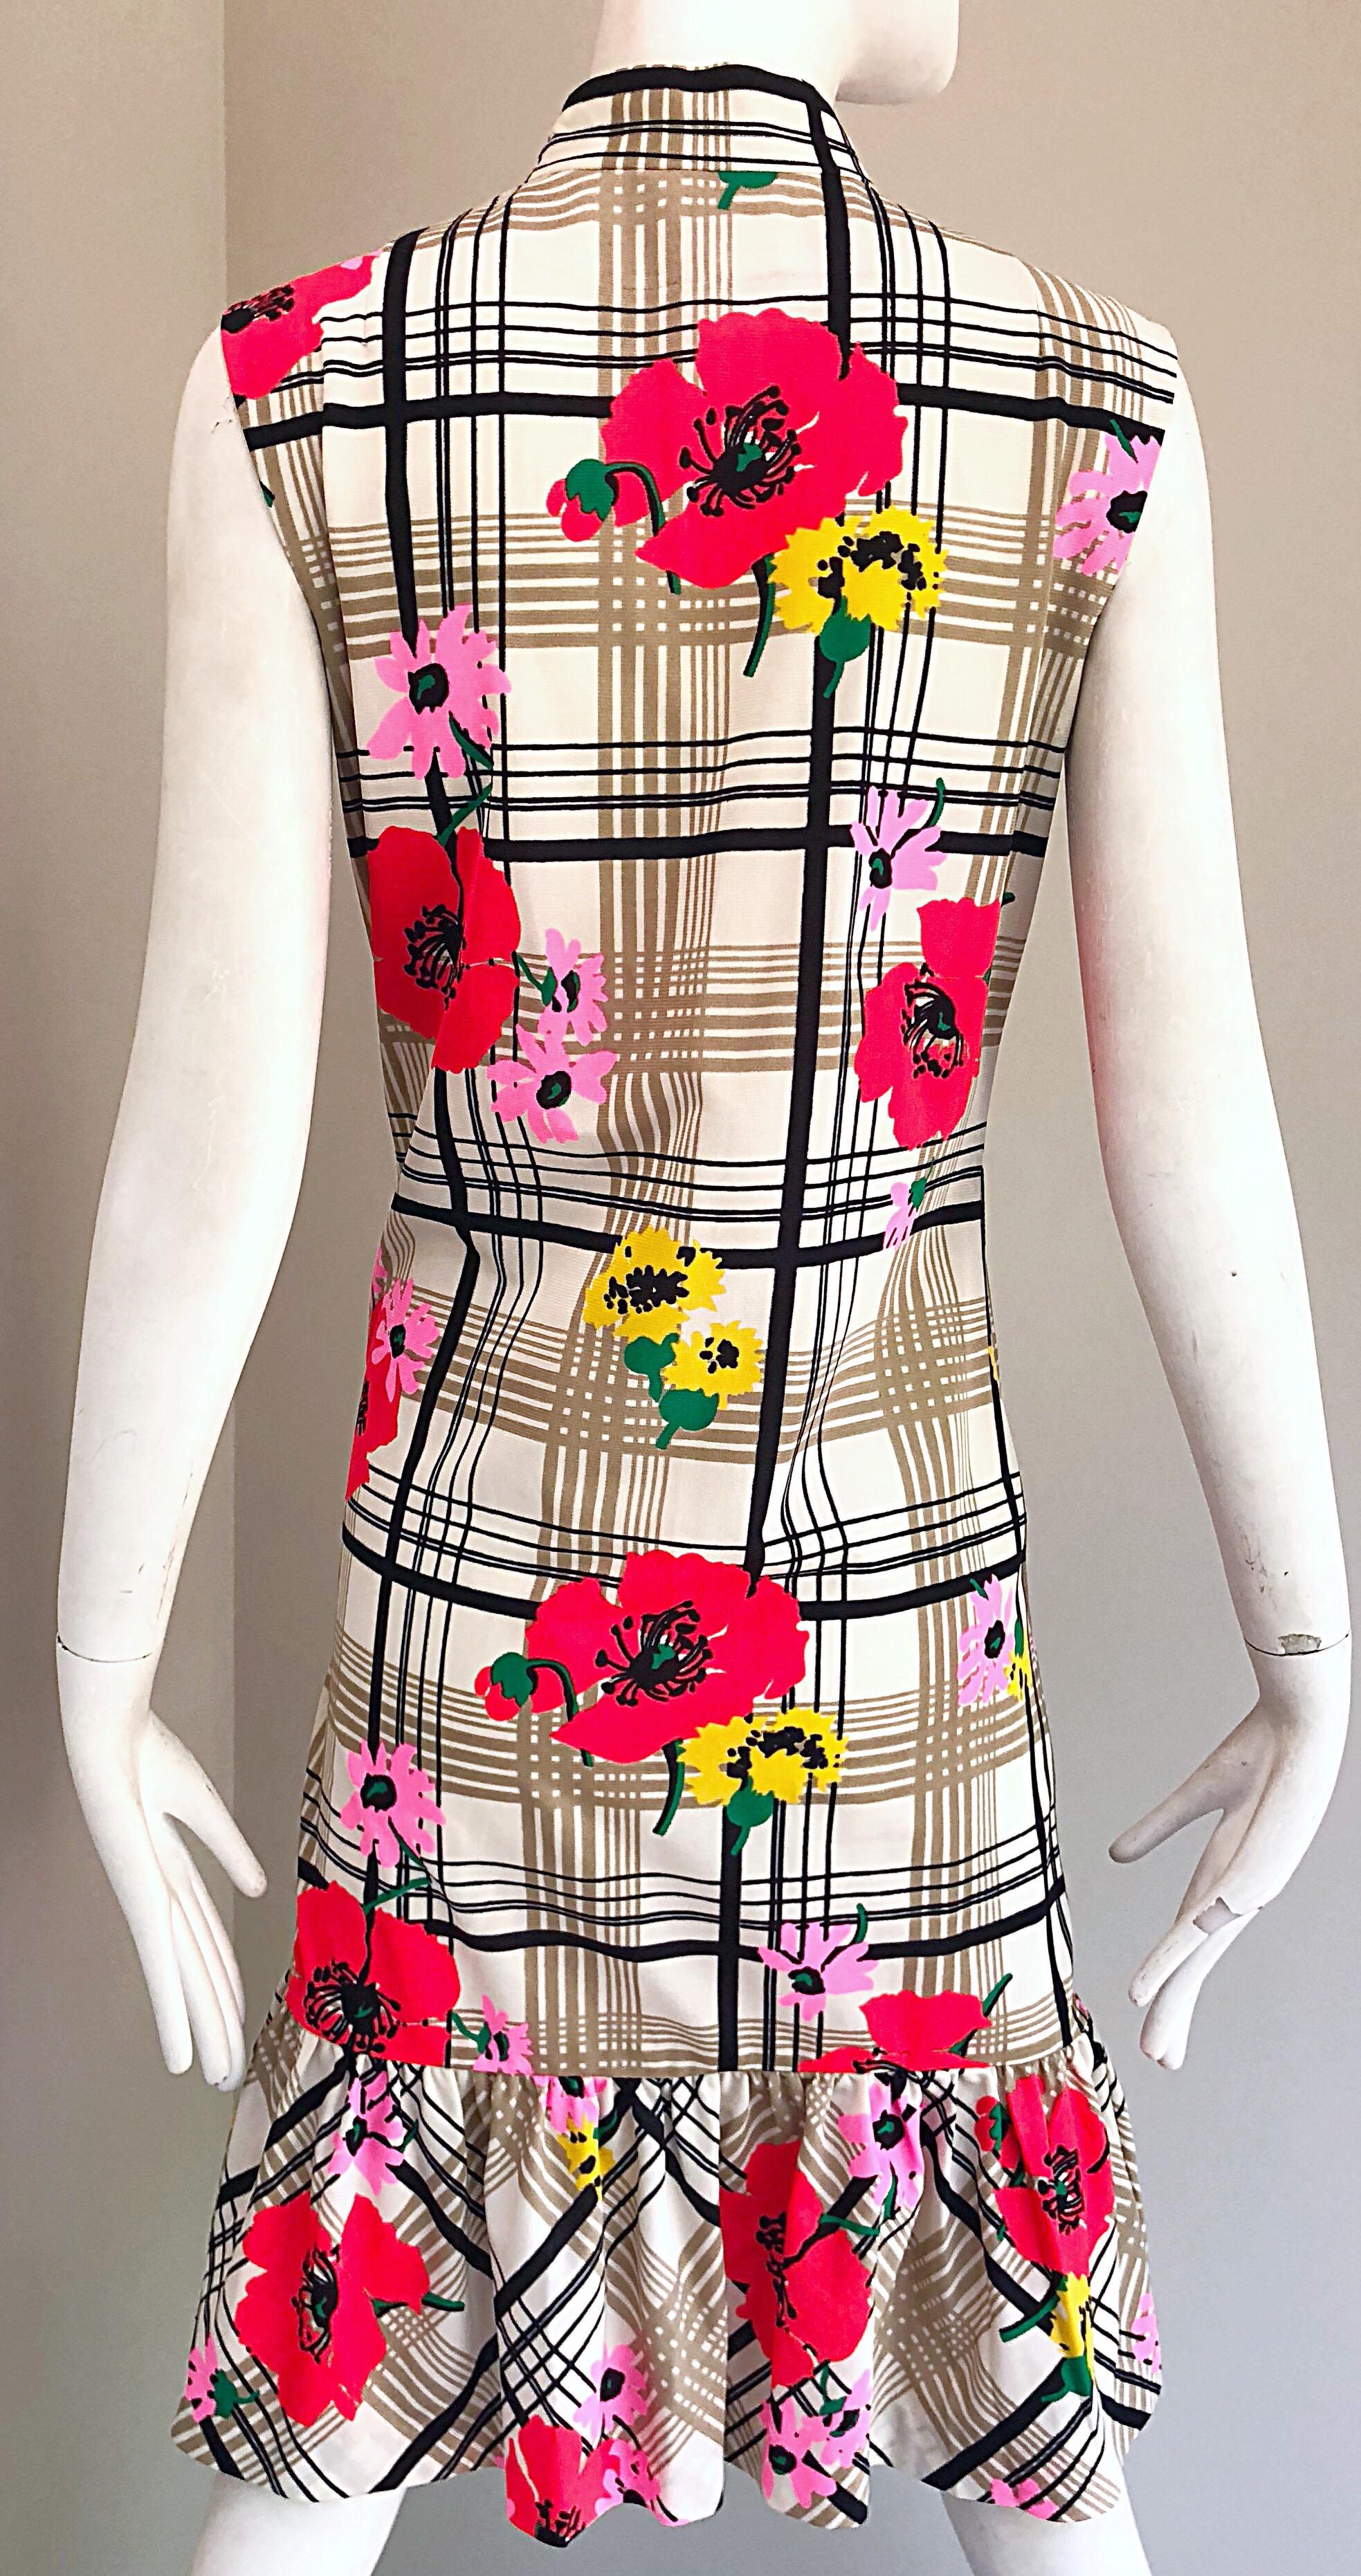 Chic 1960s Stripes and Flowers Black and White Colorful Vintage 60s Shift Dress 3